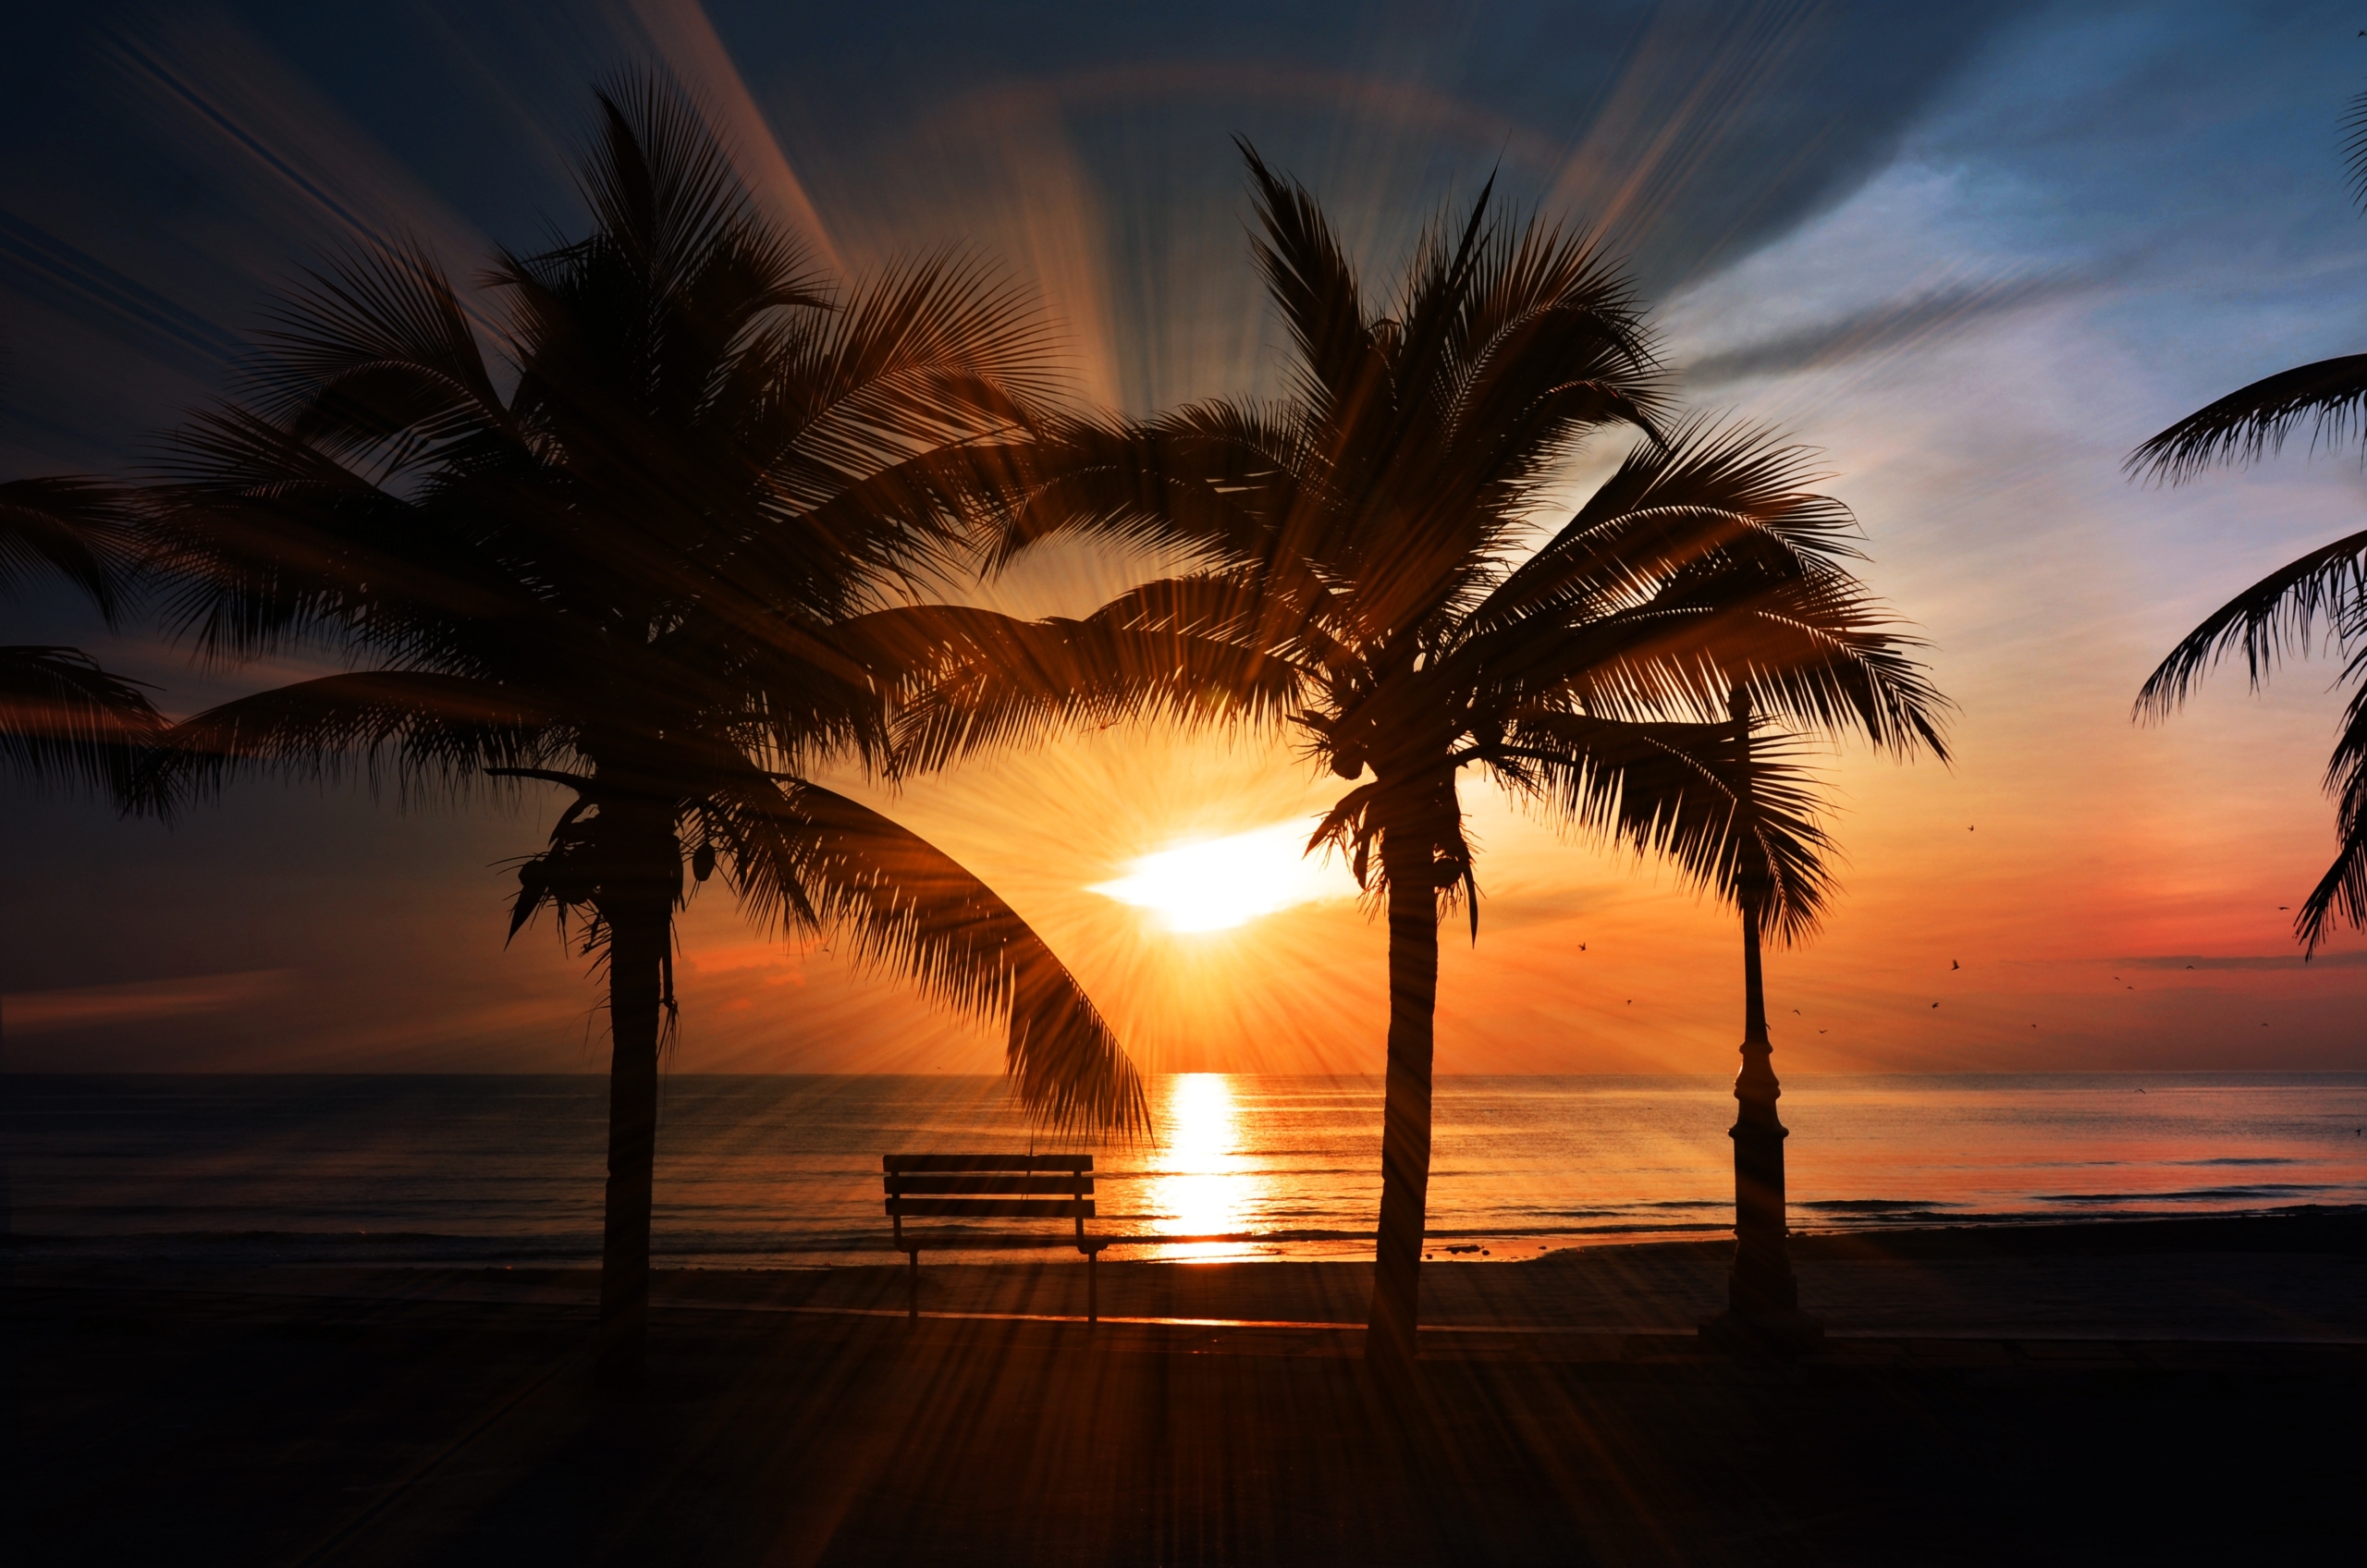 sunset on the water, sun shining through palm trees and a bench